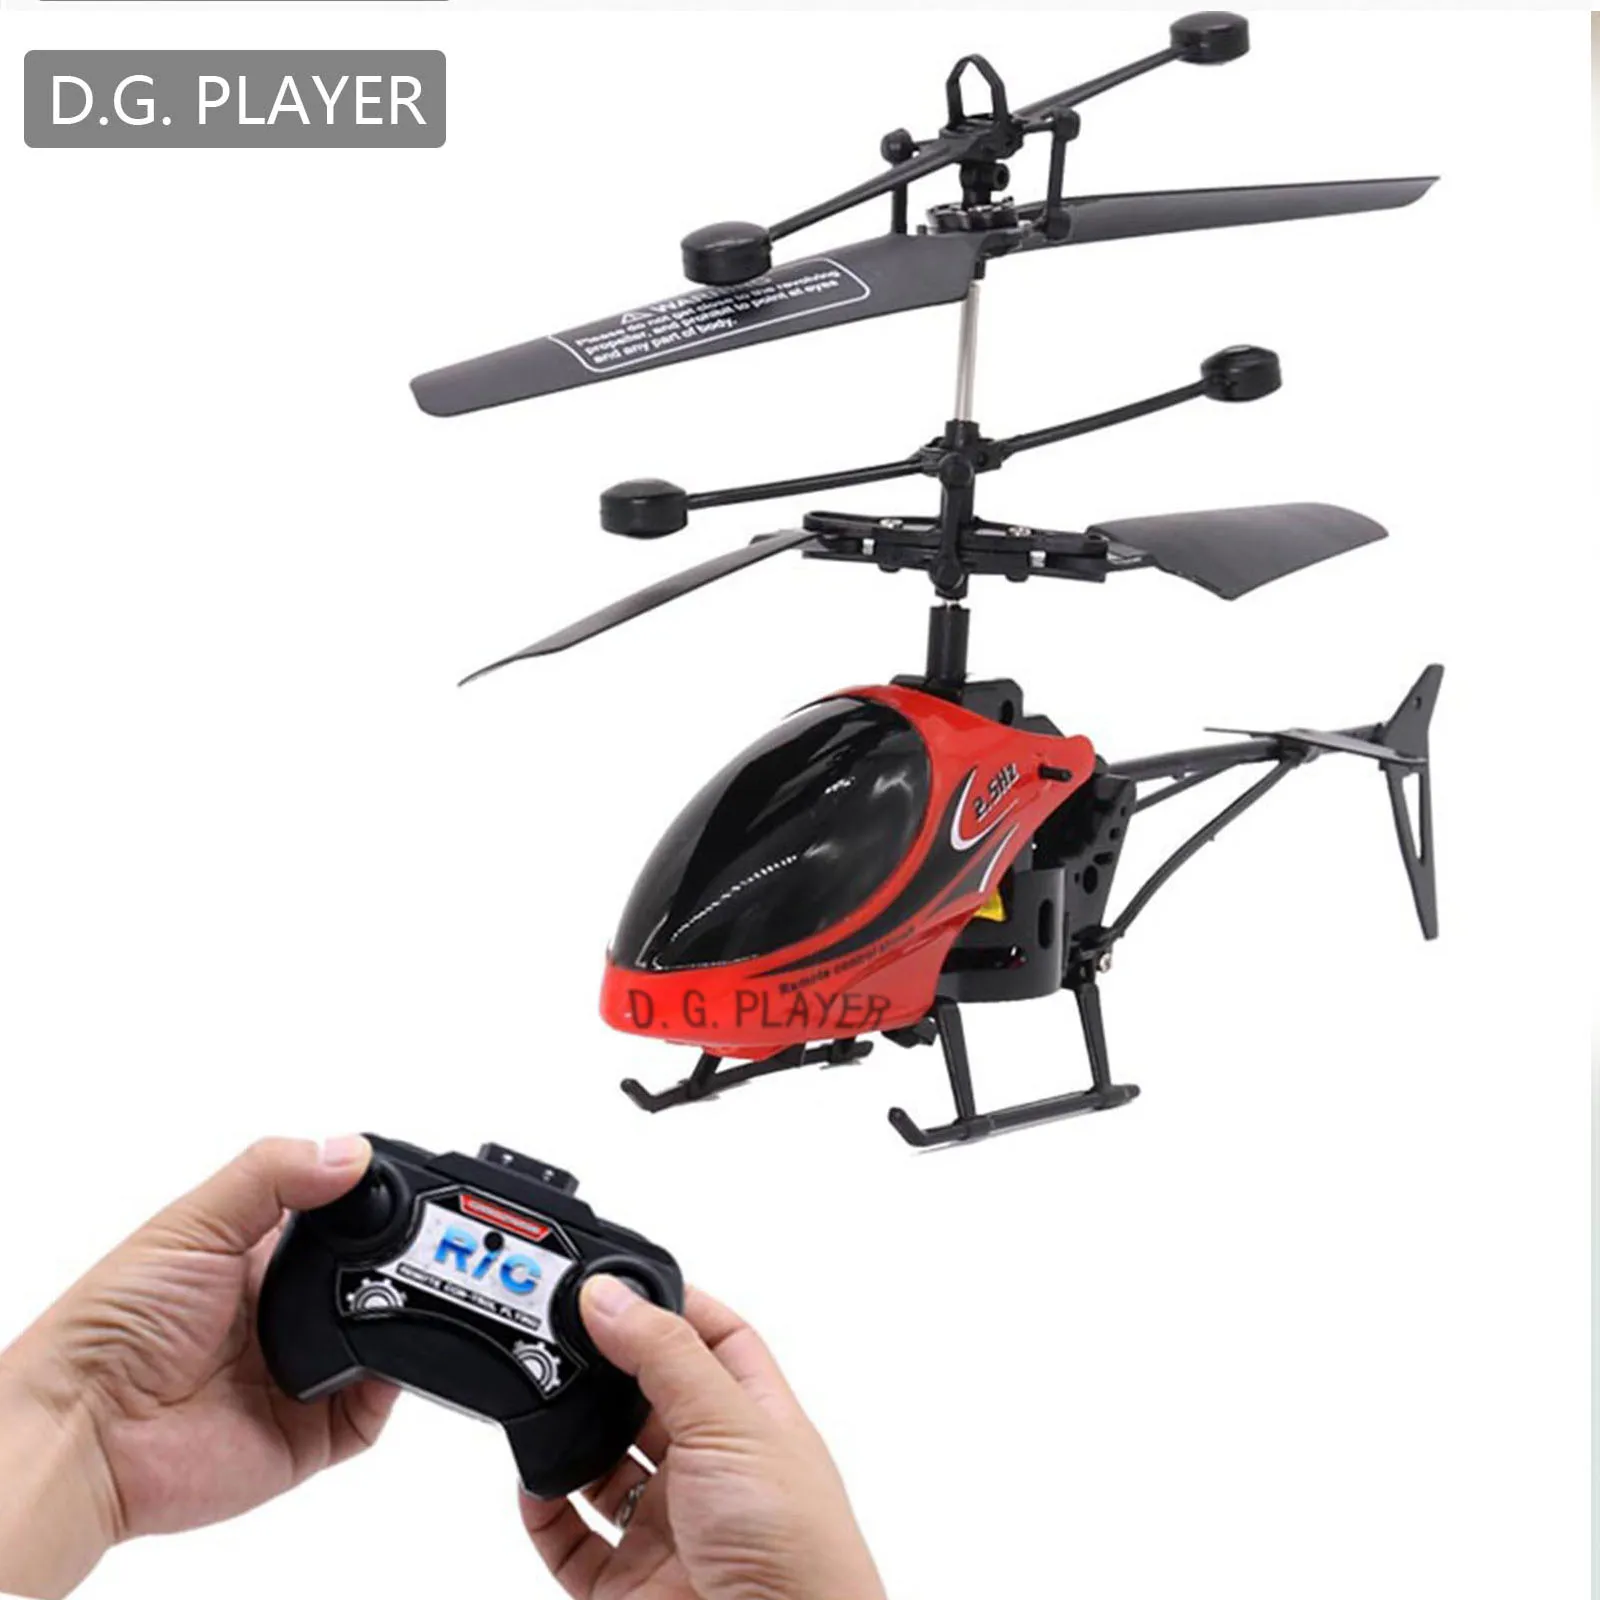 D.G. PLAYER Mini RC Helicopter Drone Toy Induction Hovering Safe and Drop - $24.95